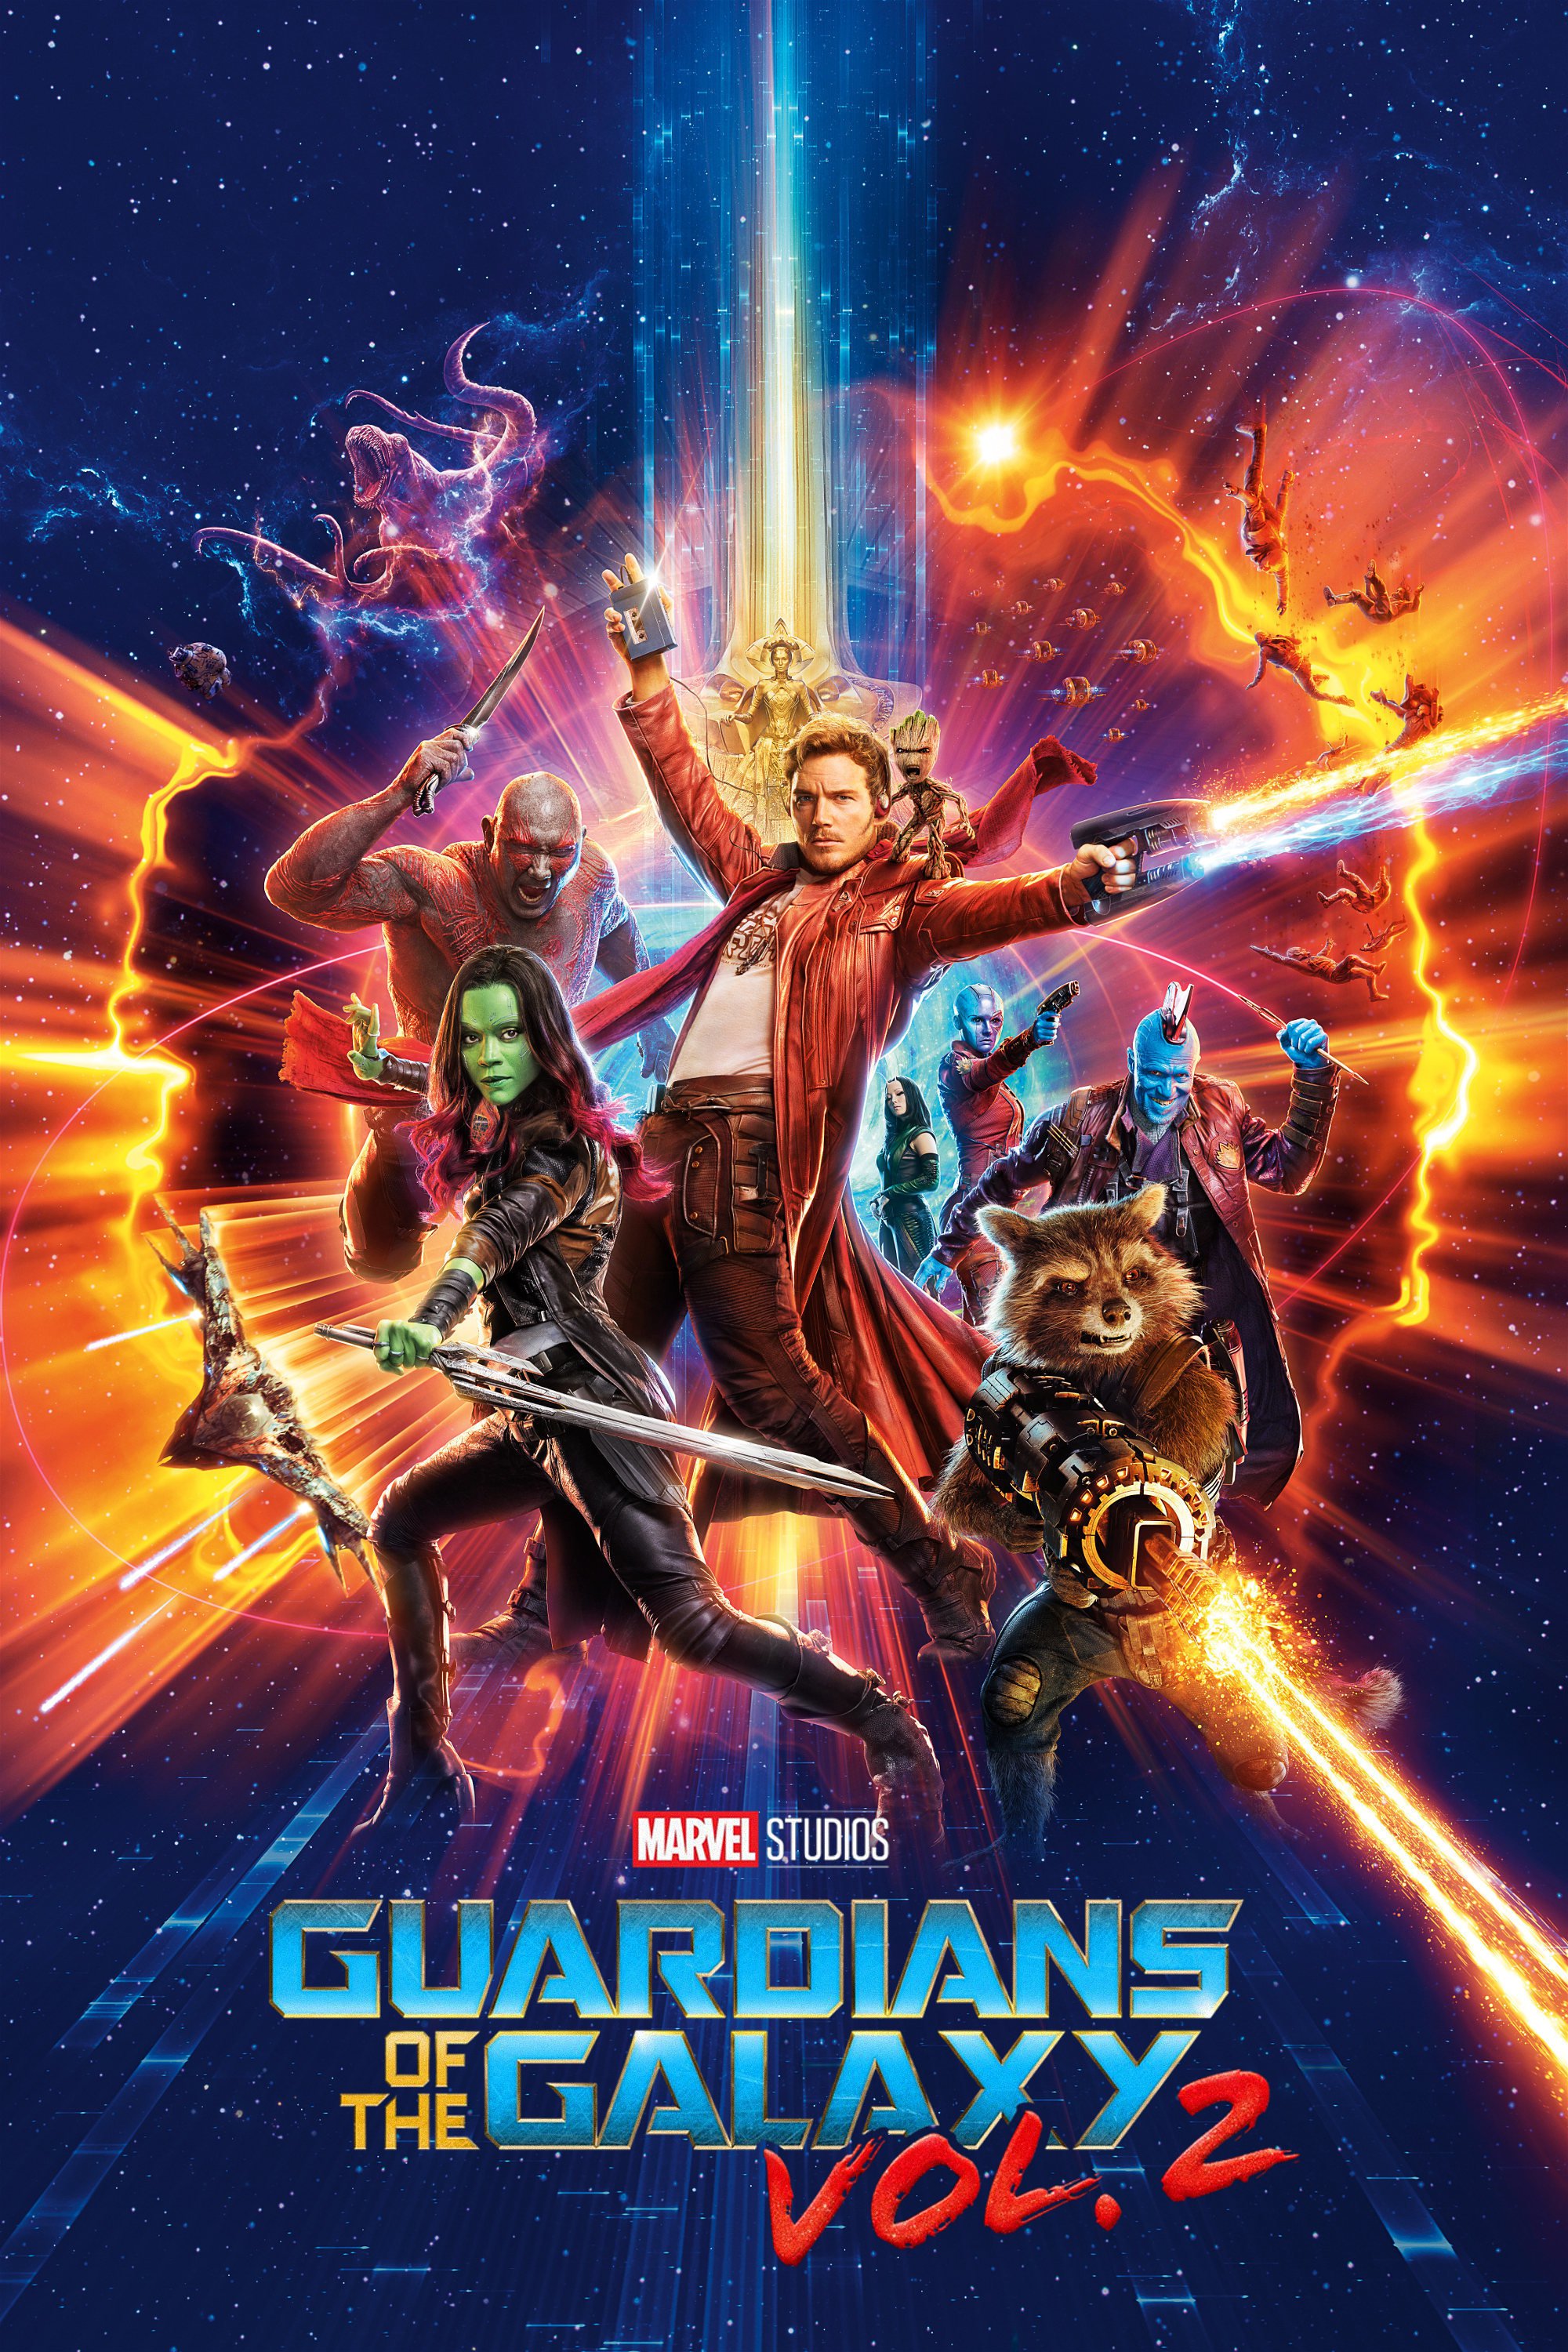 Guardians of the Galaxy Vol 2 for windows download free